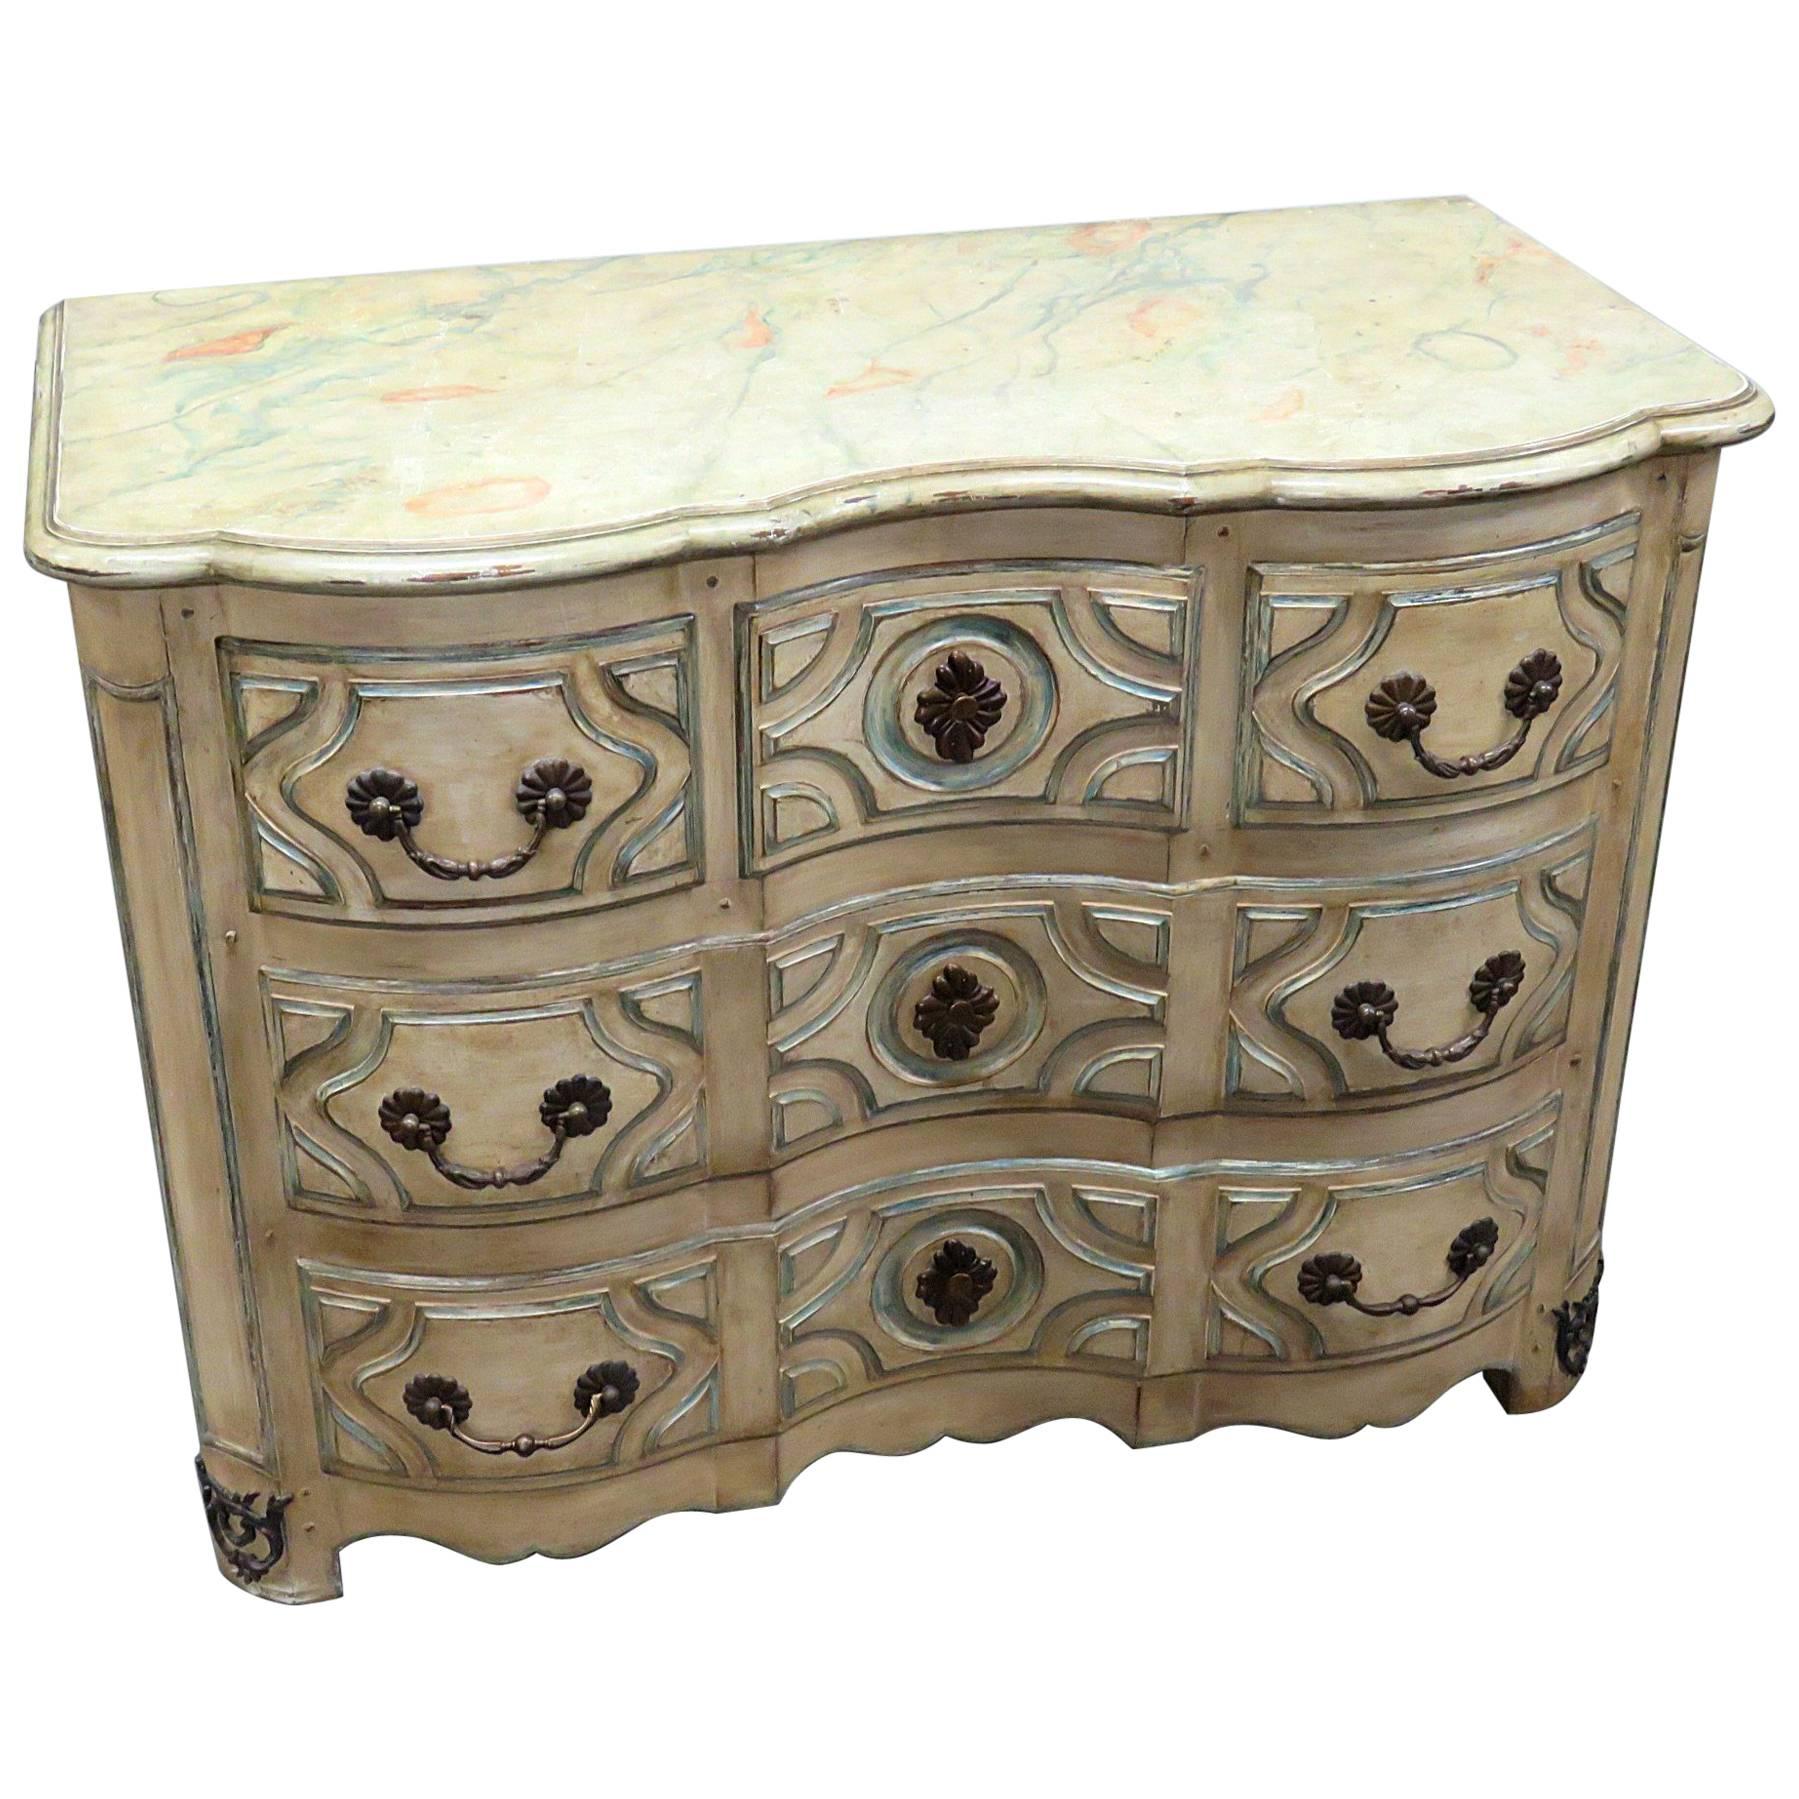 Maison Jansen Style Distressed Faux Marble Paint Decorated Foyer Chest Commode For Sale